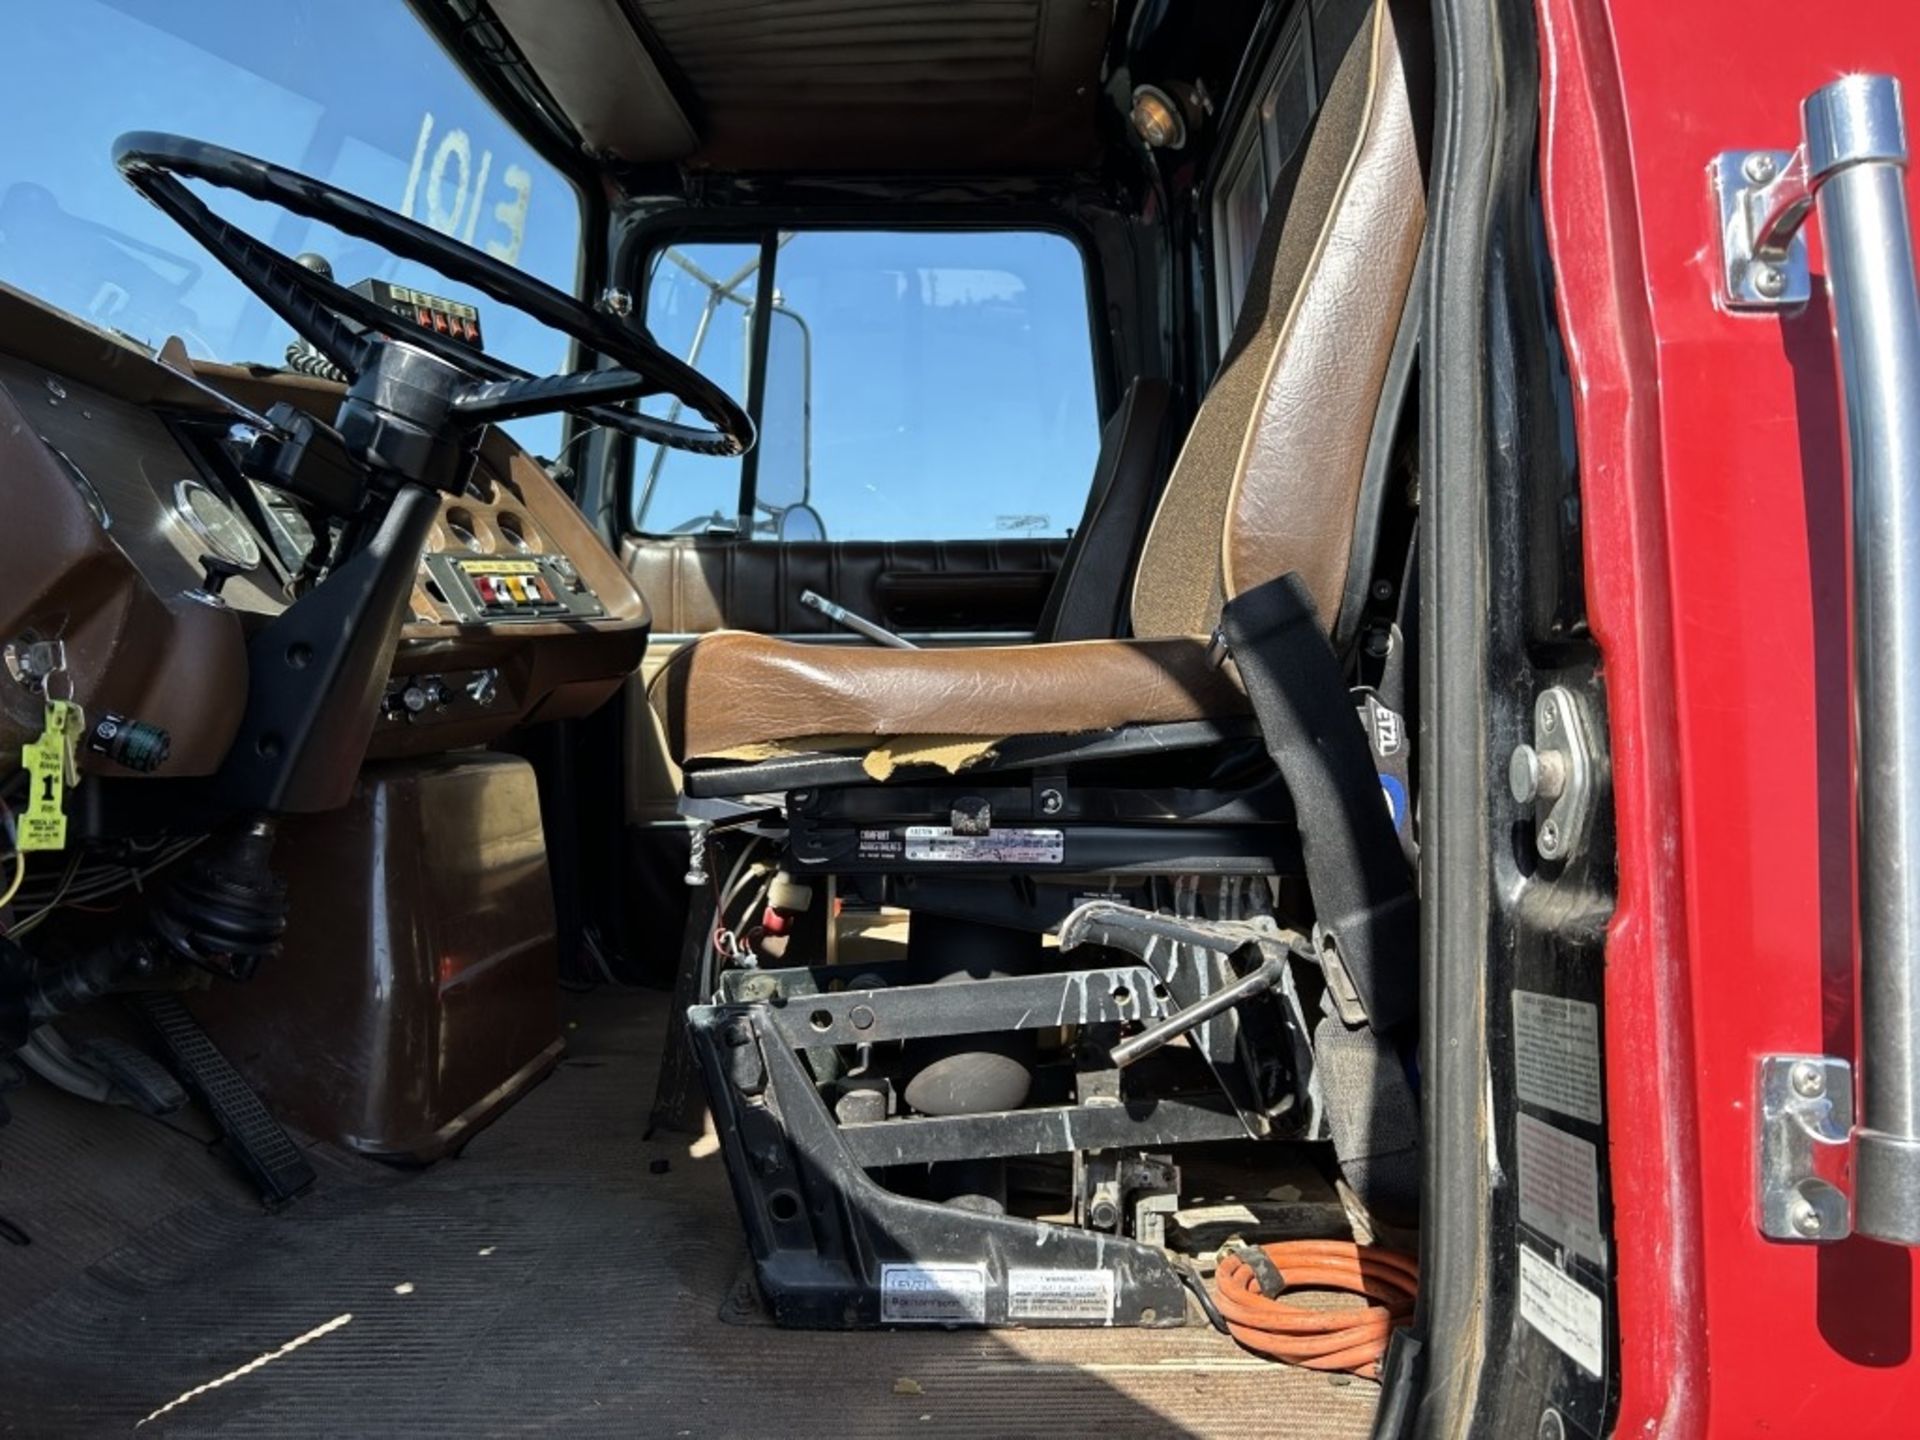 1986 Ford 9000 Fire Engine - Image 16 of 69